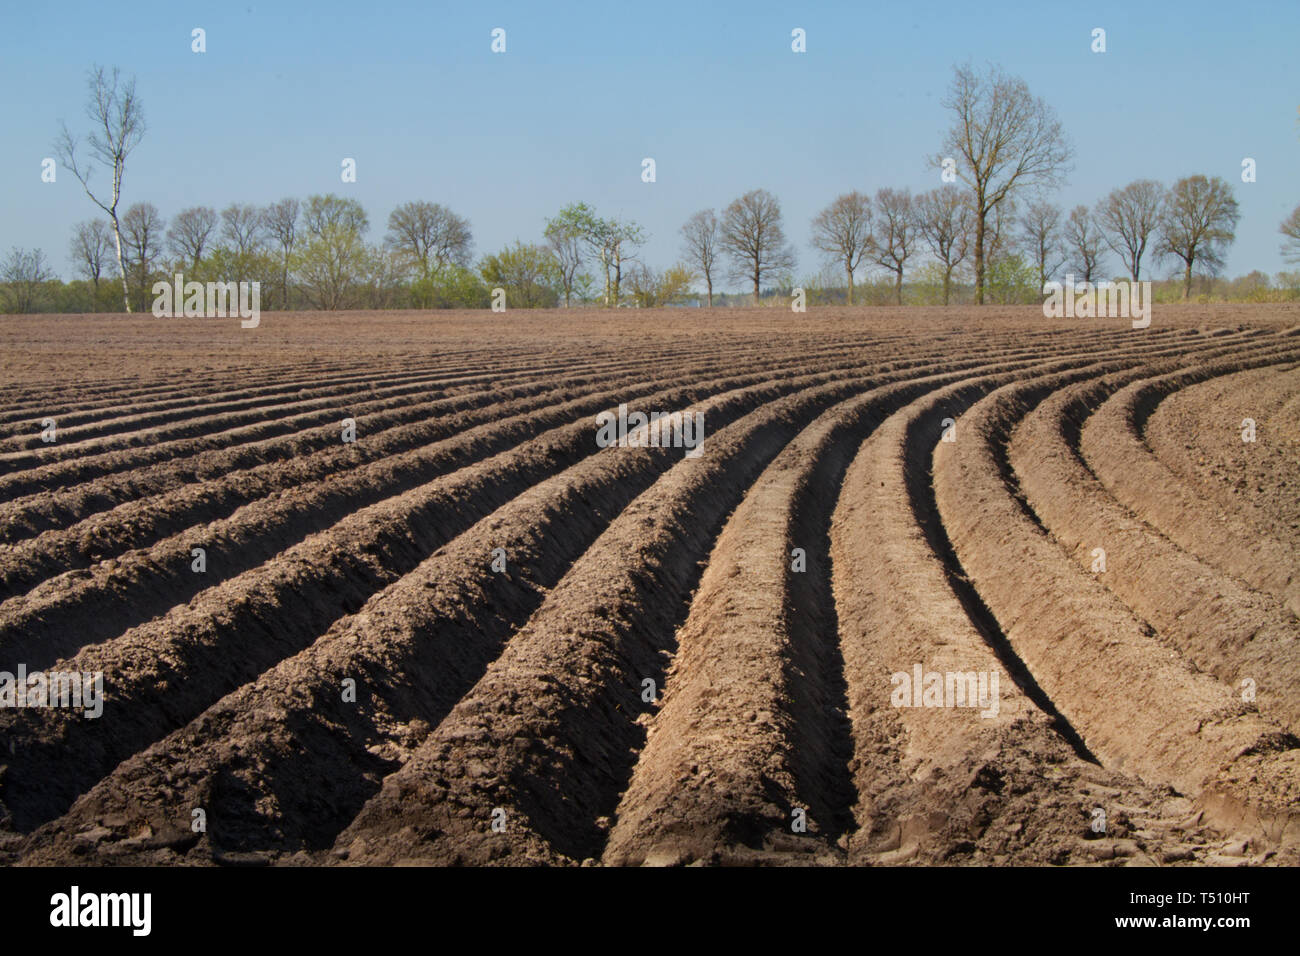 Agricultural landscape with pattern of curved ridges and furrows in a humic sandy field, prepared for cultivation of potatoes Stock Photo